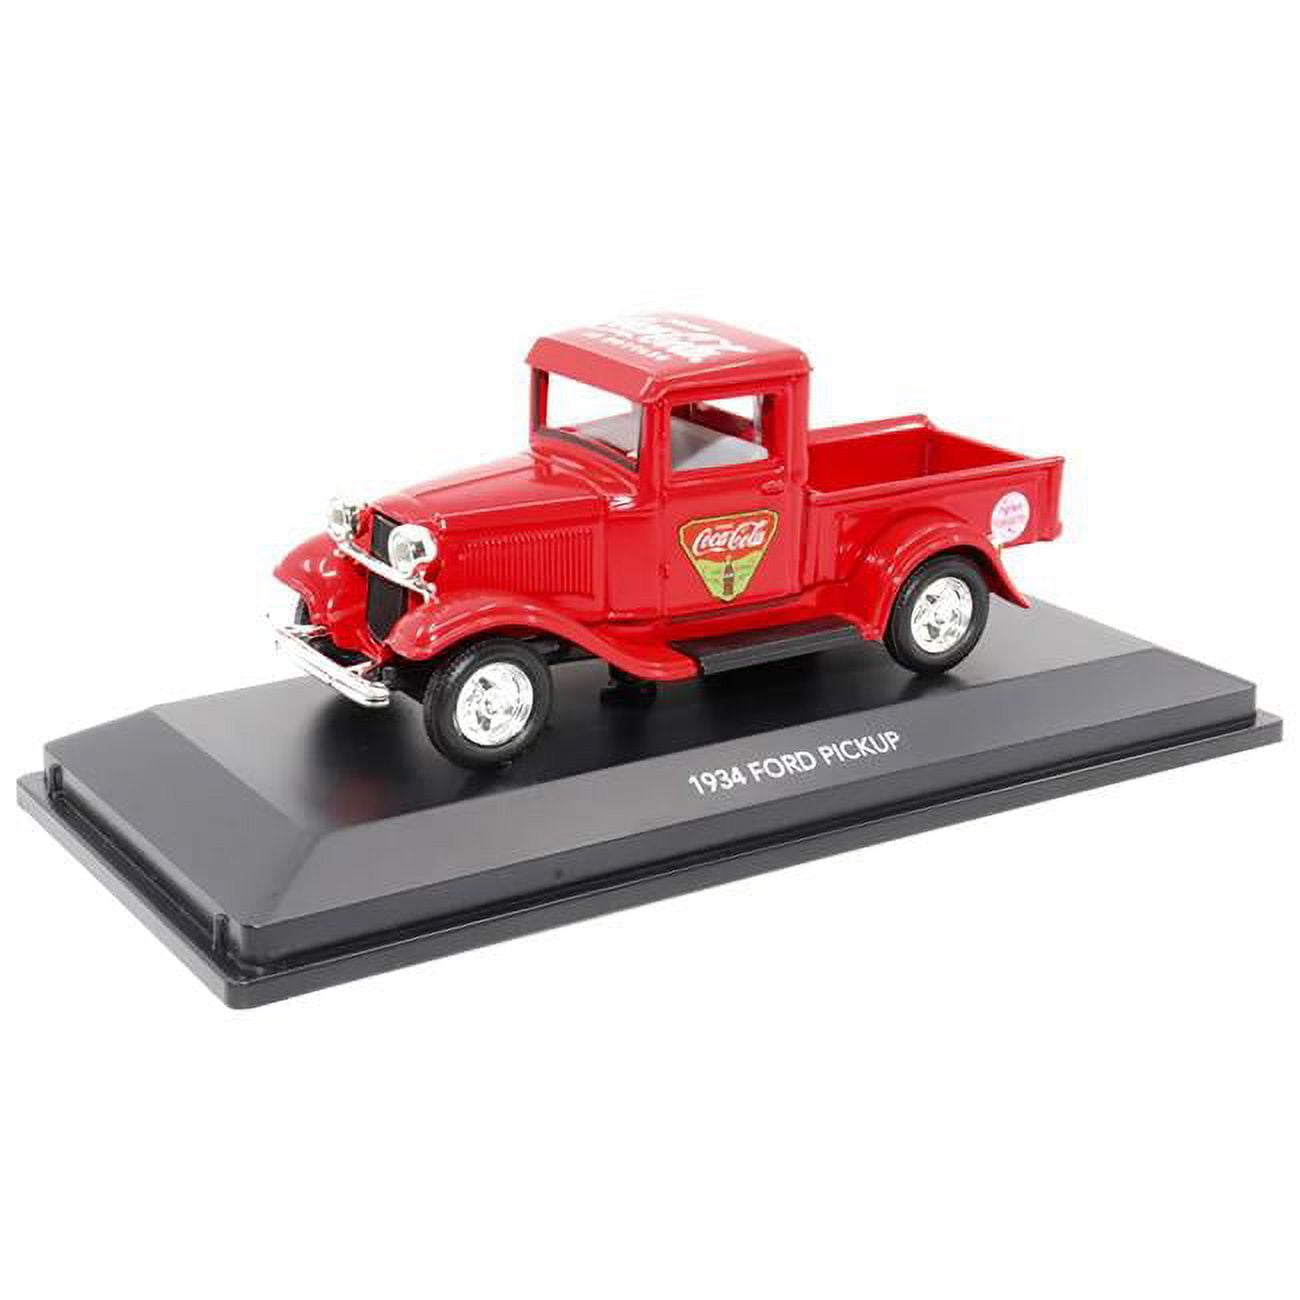 Motorcity Classics 443031 1934 Ford Pickup Truck Coca-Cola 1 by 43 Scale Diecast Scale Model Car, Red -  MOTOR CITY CLASSICS